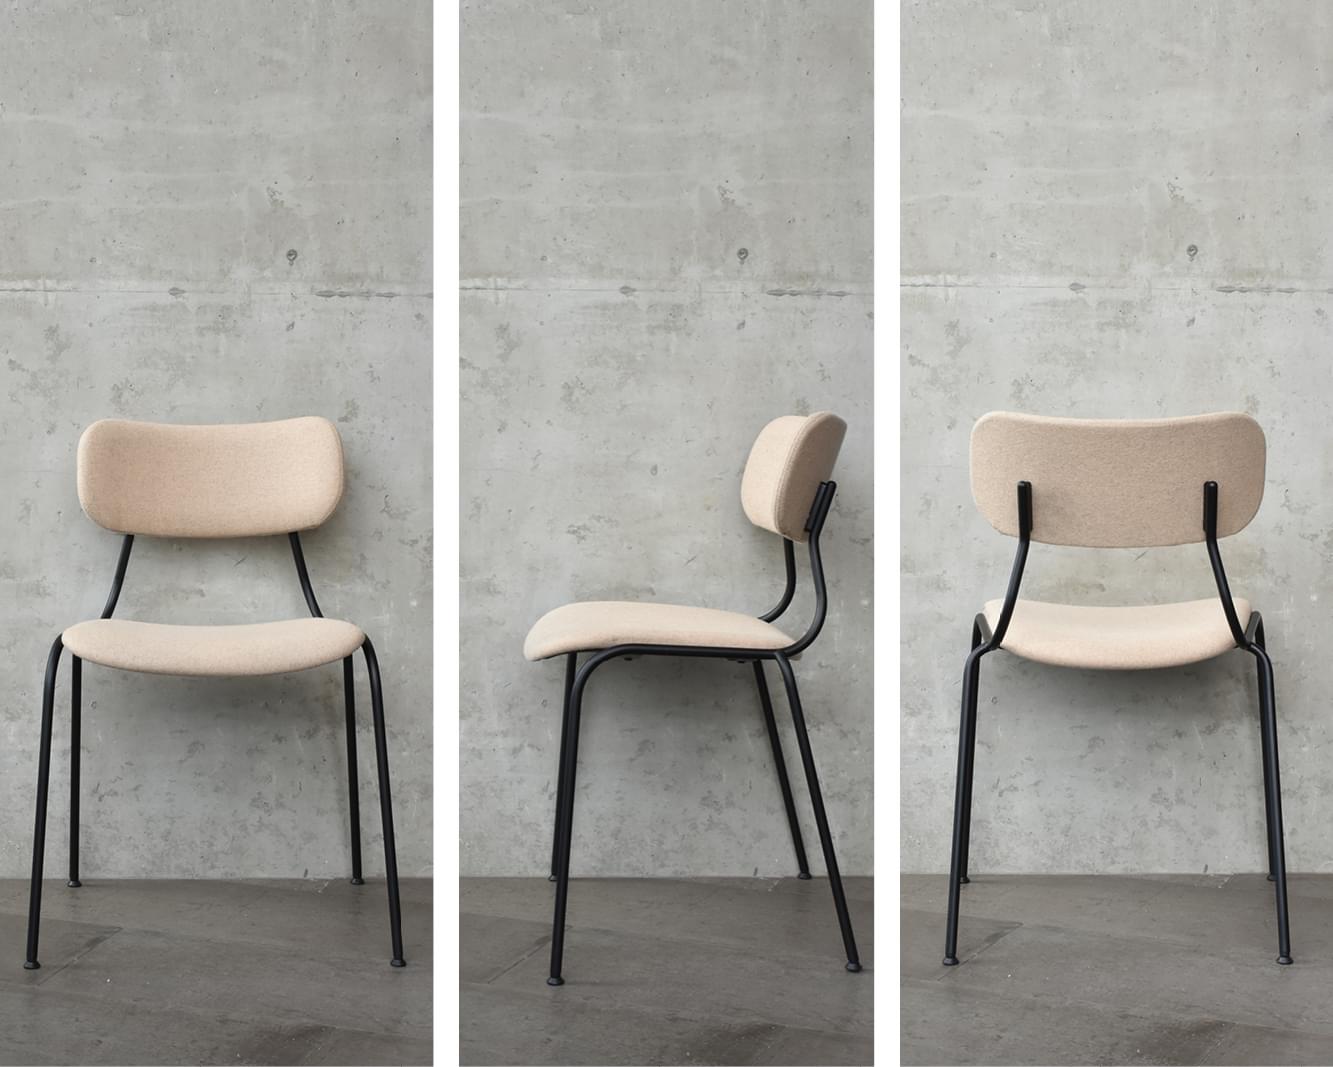 Kiyumi soft side chair - New upholstered stacking chair as seen at the Salone del Mobile Milano April, 2019